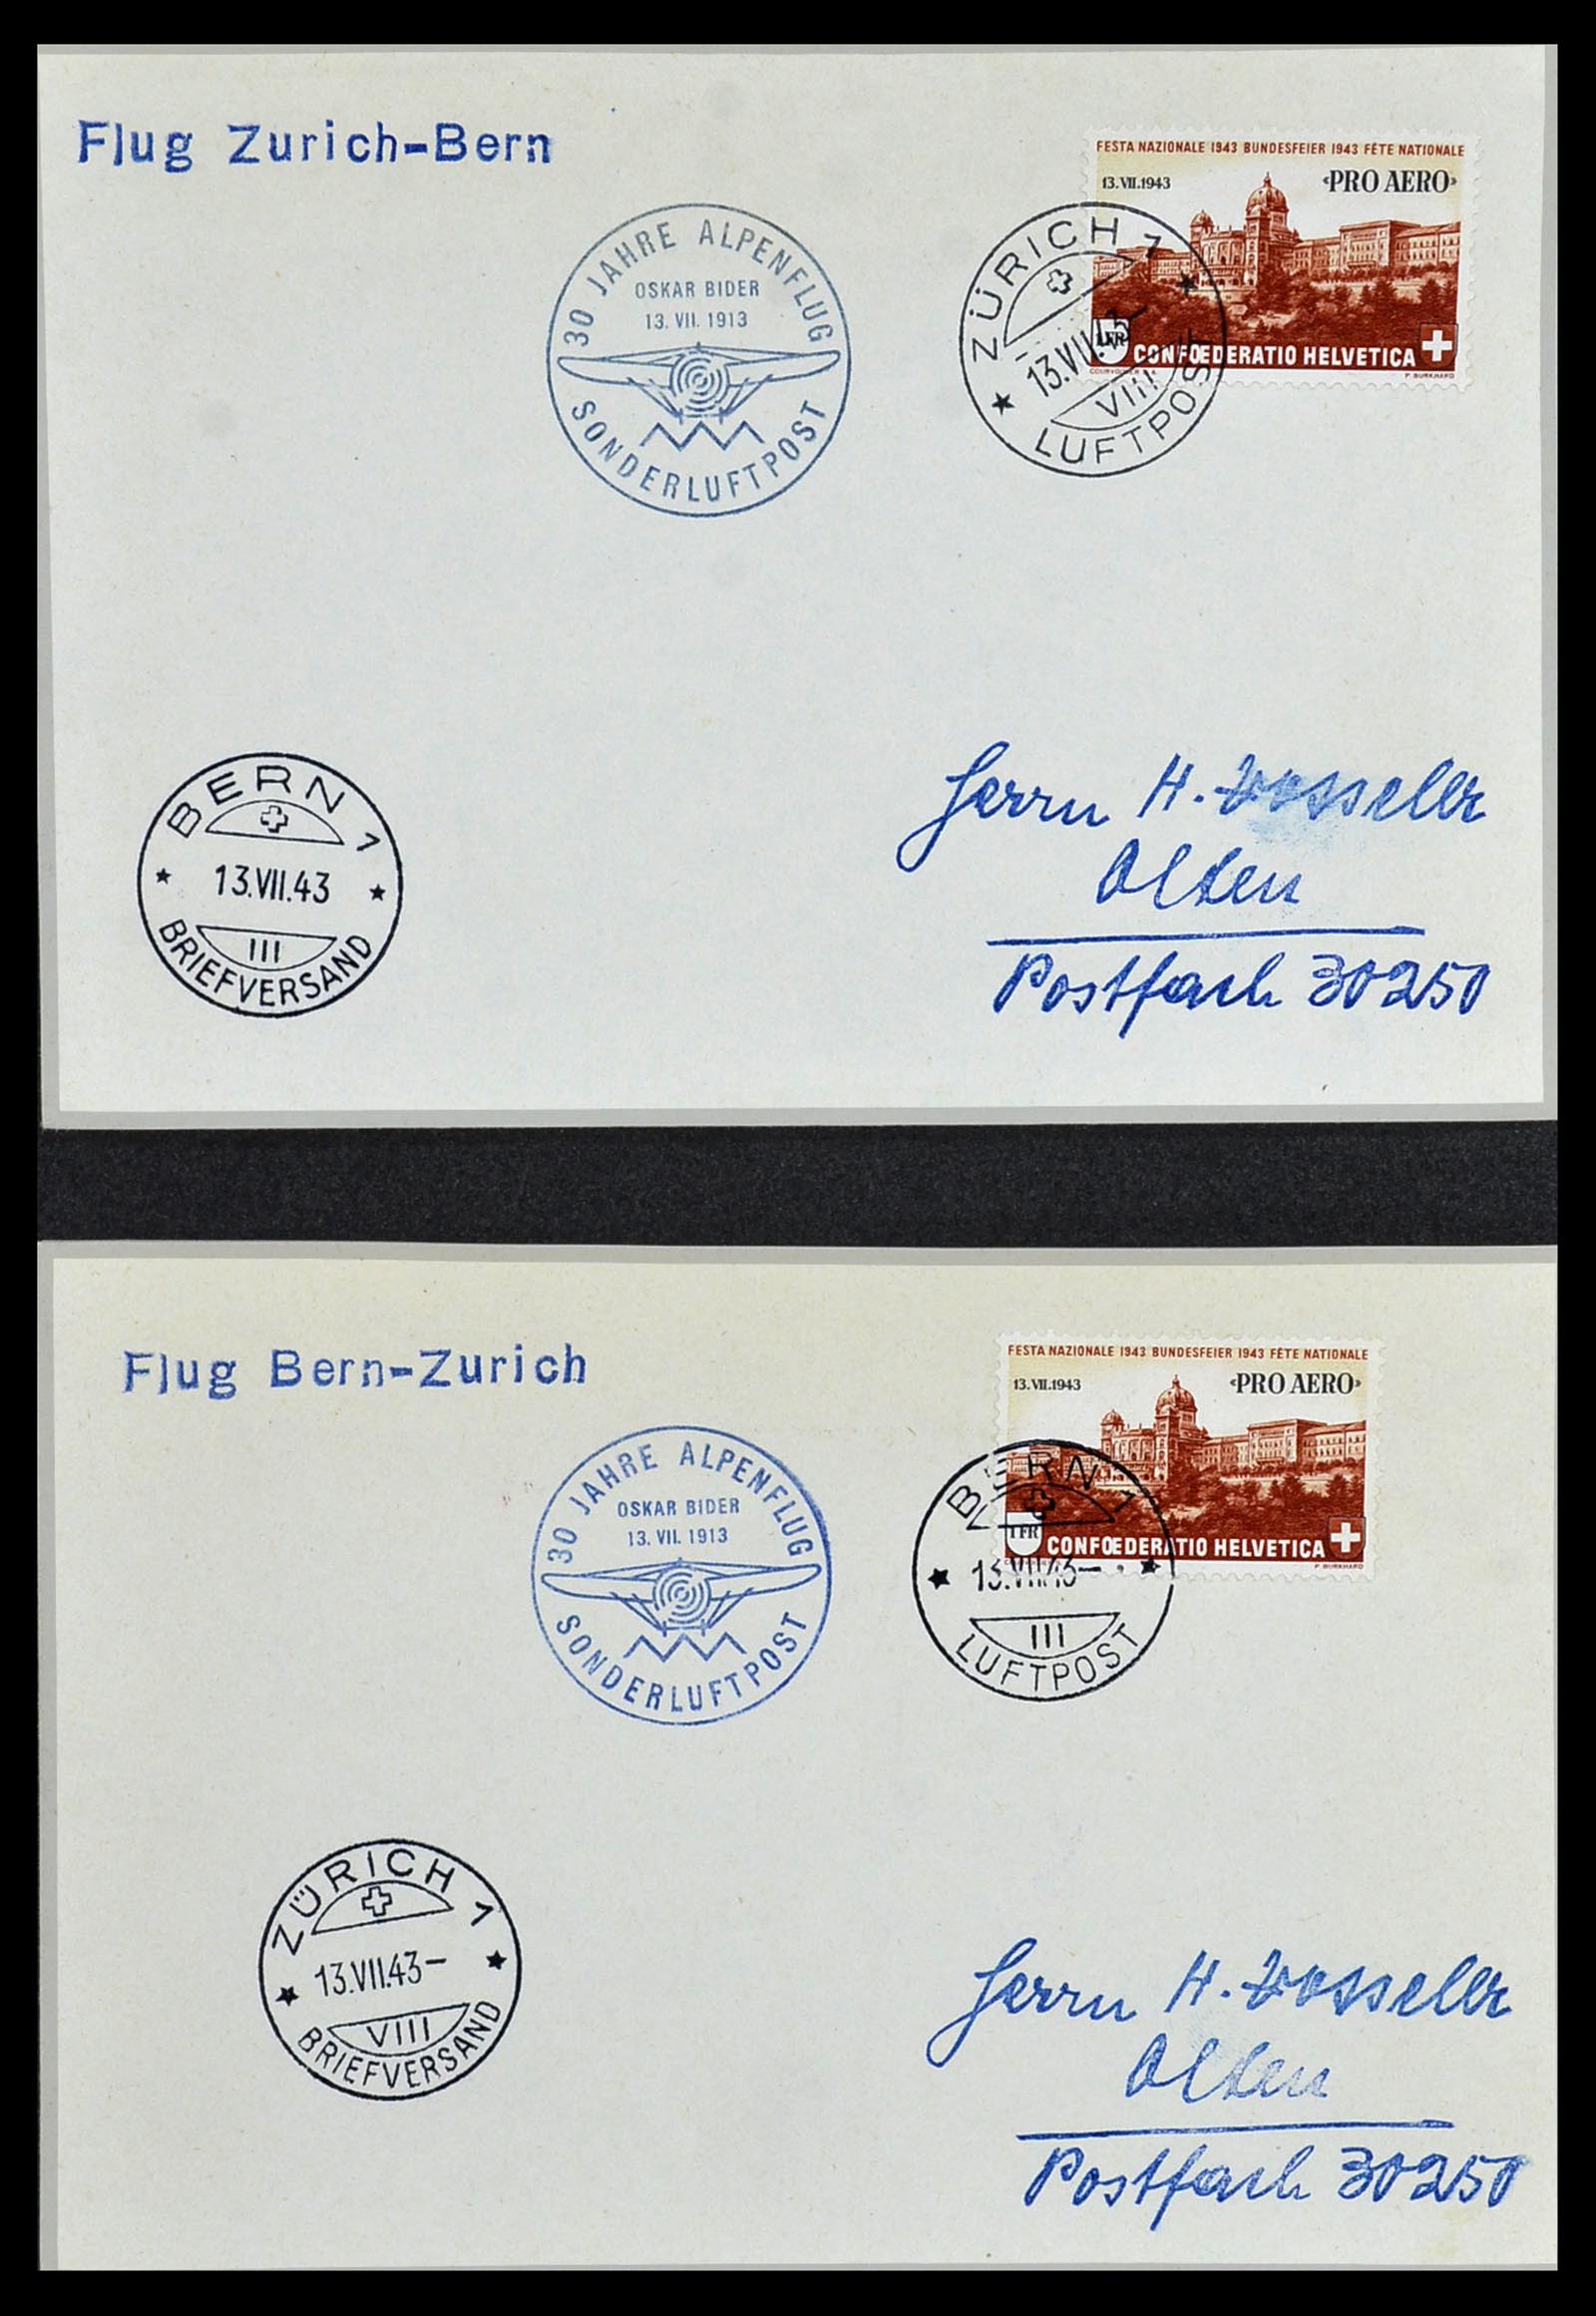 34141 089 - Stamp collection 34141 Switzerland airmail covers 1920-1960.